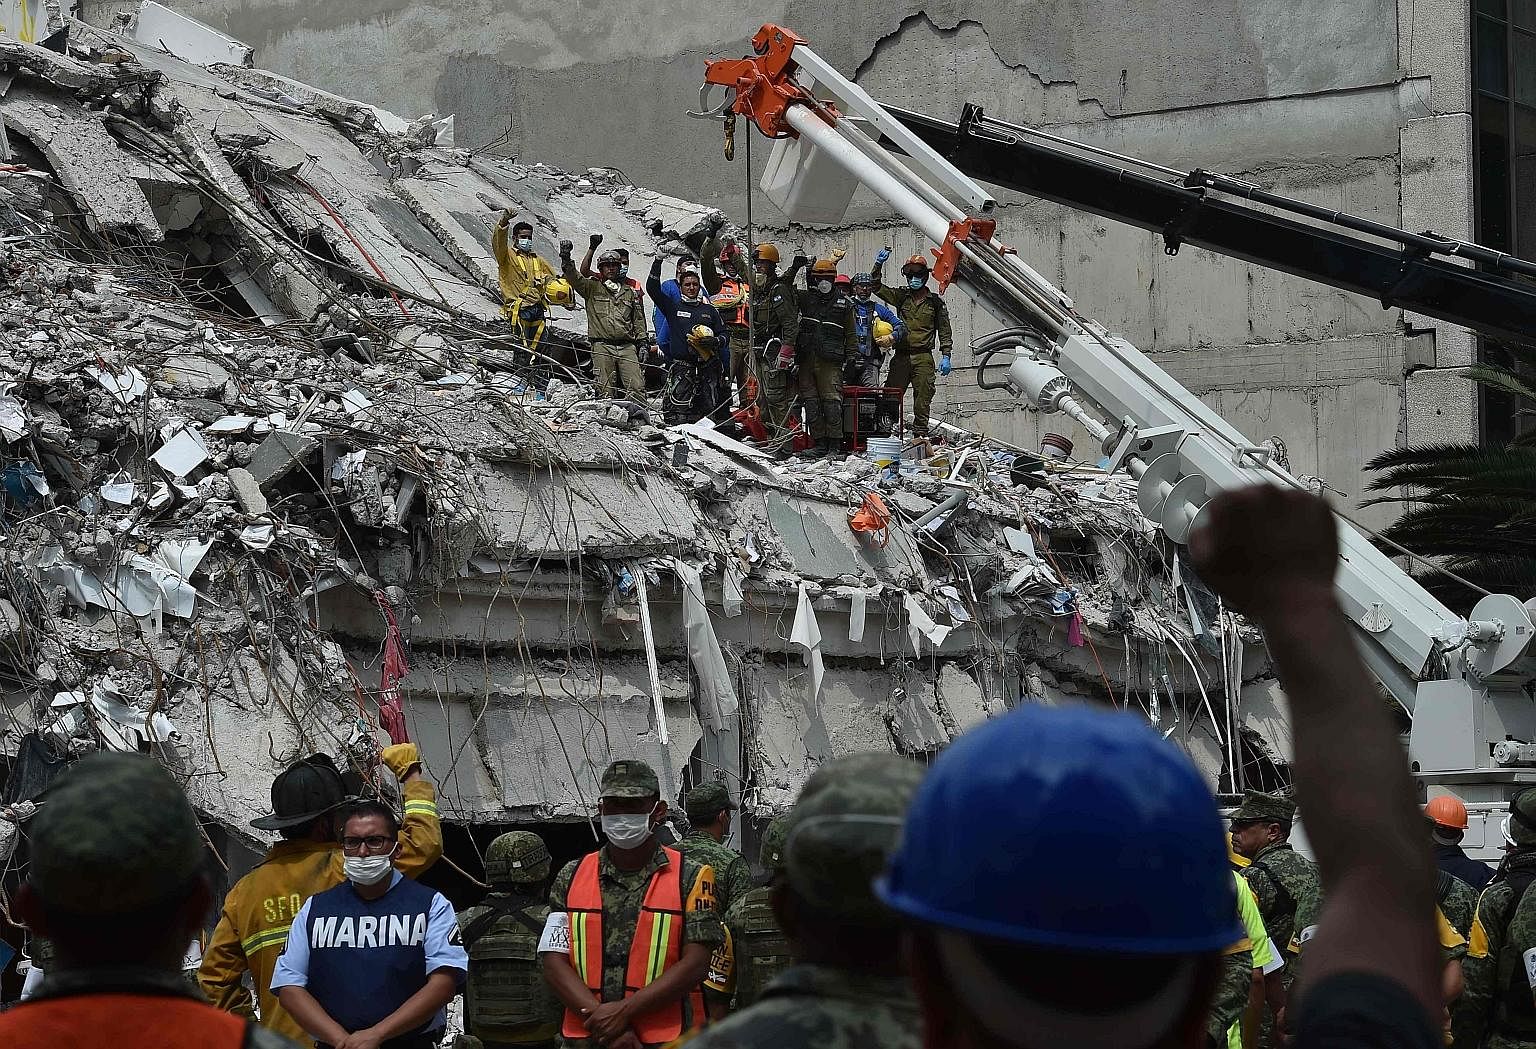 Rescuers and firefighters raising their fists to pay their respects to a man who survived the quake but died before they could reach him during their search for survivors at a flattened building in Mexico City on Thursday.